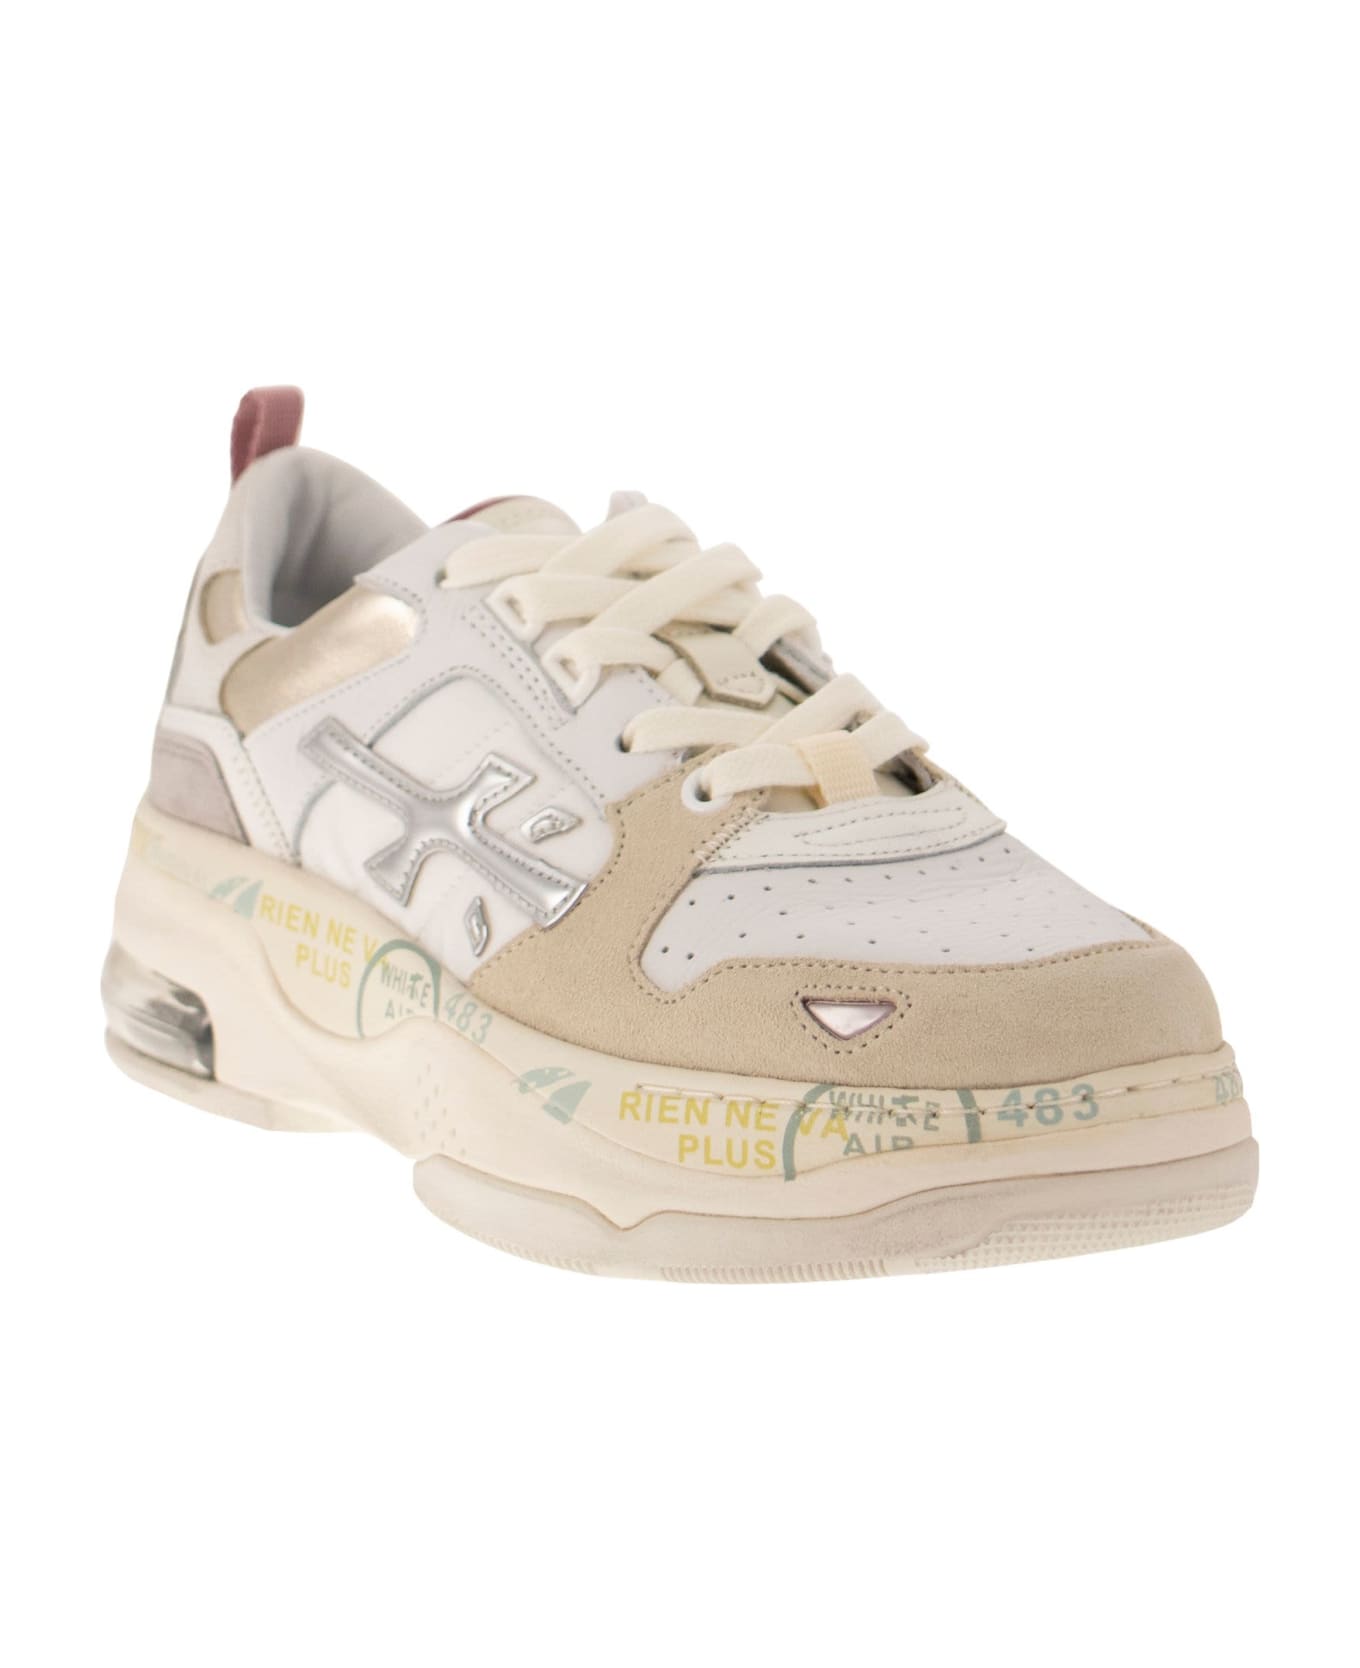 Premiata 'draked' Multicolor Leather Blend Sneakers - White/ivory スニーカー